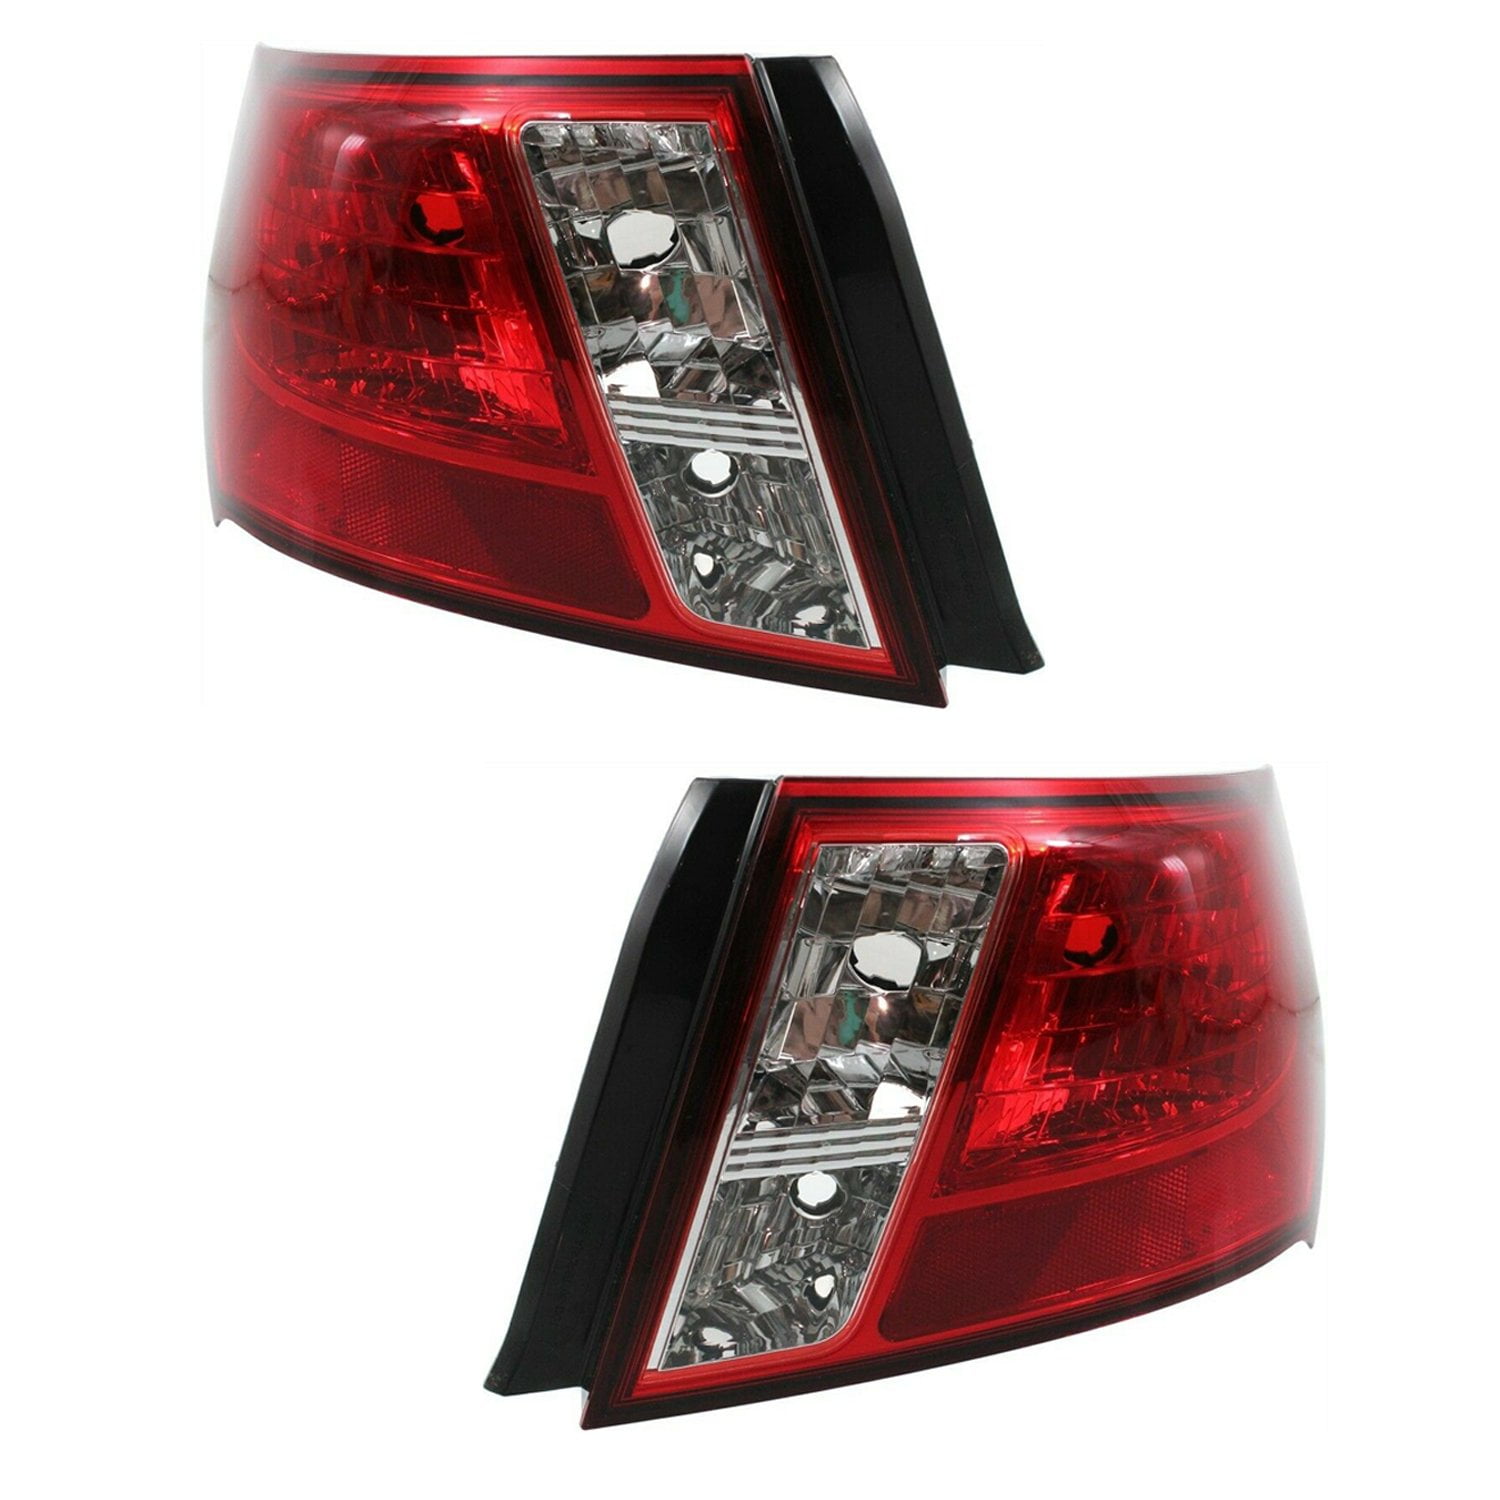 Left and Right Set Fits 00-01 NISSAN ALTIMA SE  TAIL LIGHT/LAMP  Pair